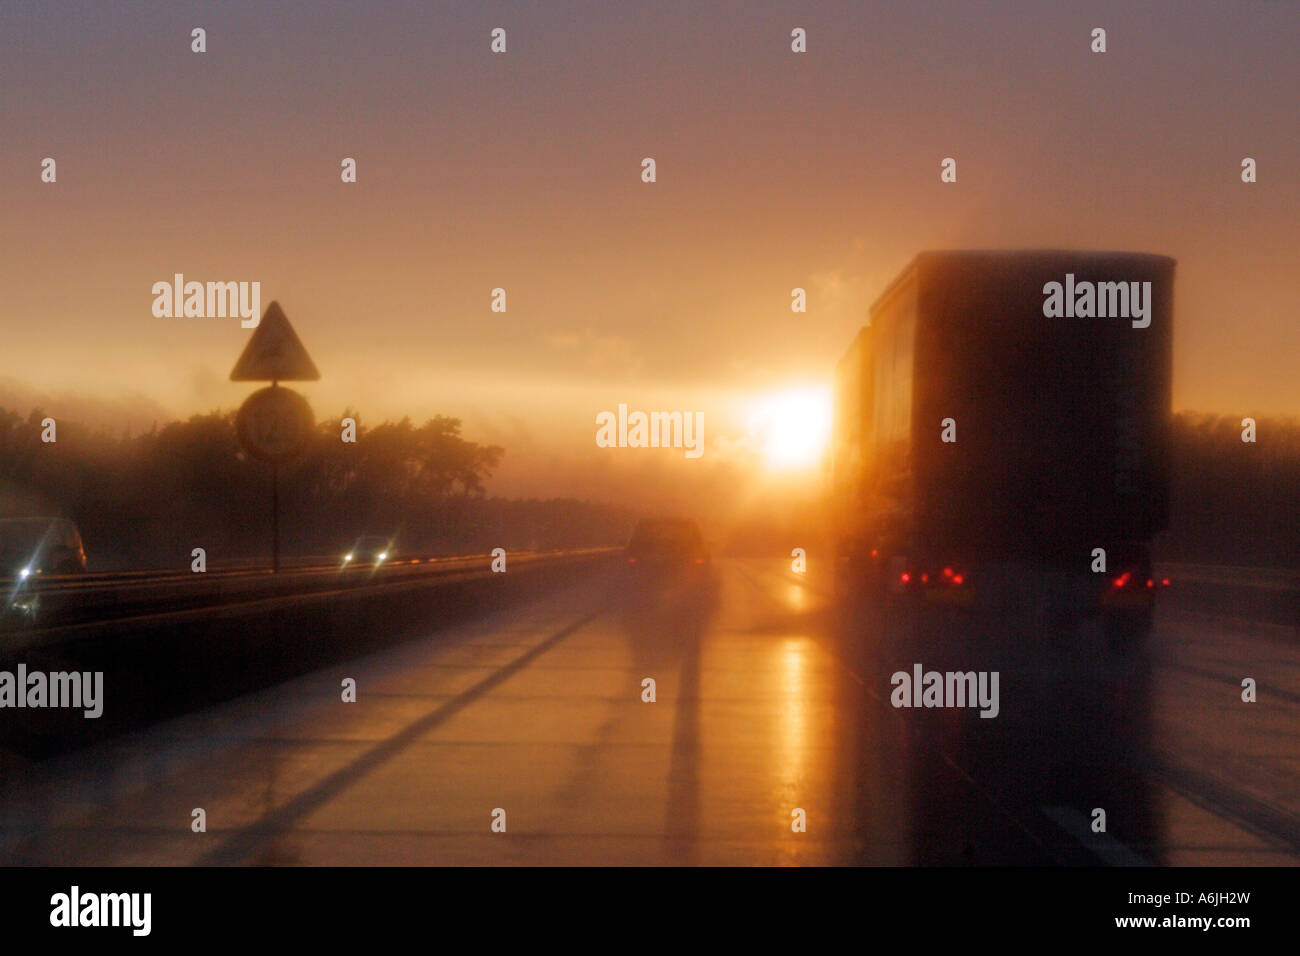 Cars on a highway at sunset, just after rainfall Stock Photo